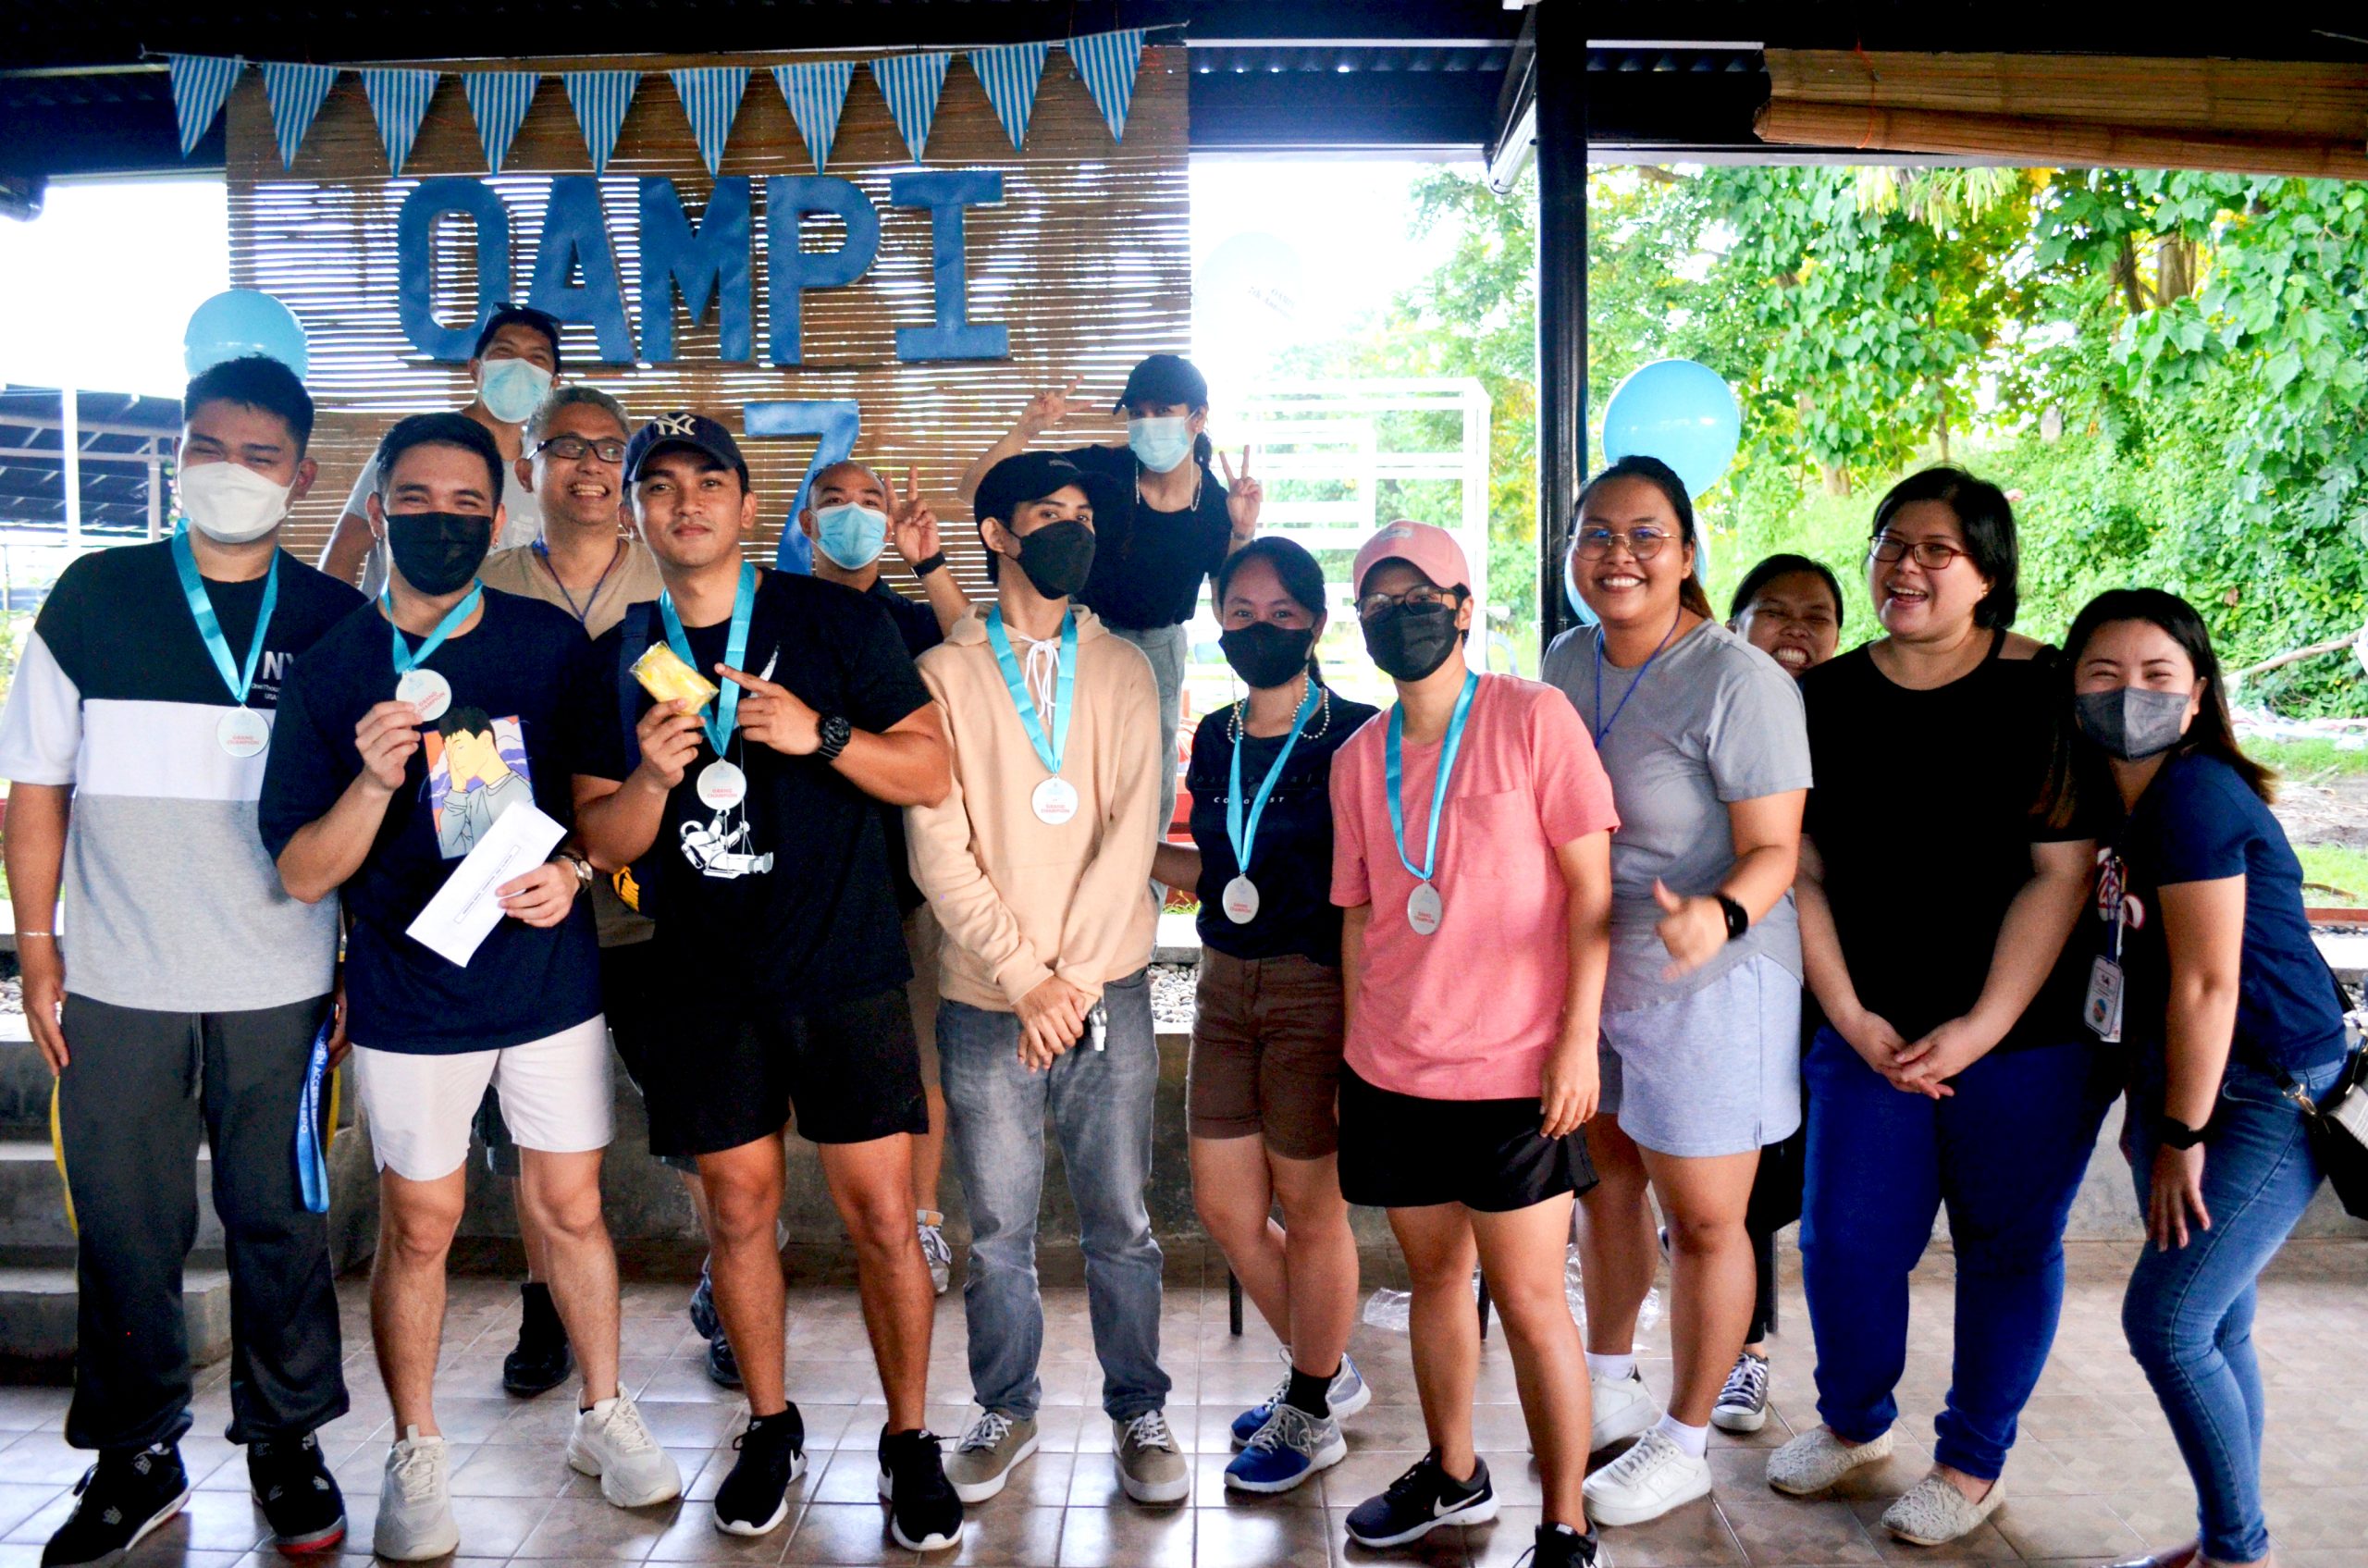 challenge winners awarded during Open Access BPO Davao team building